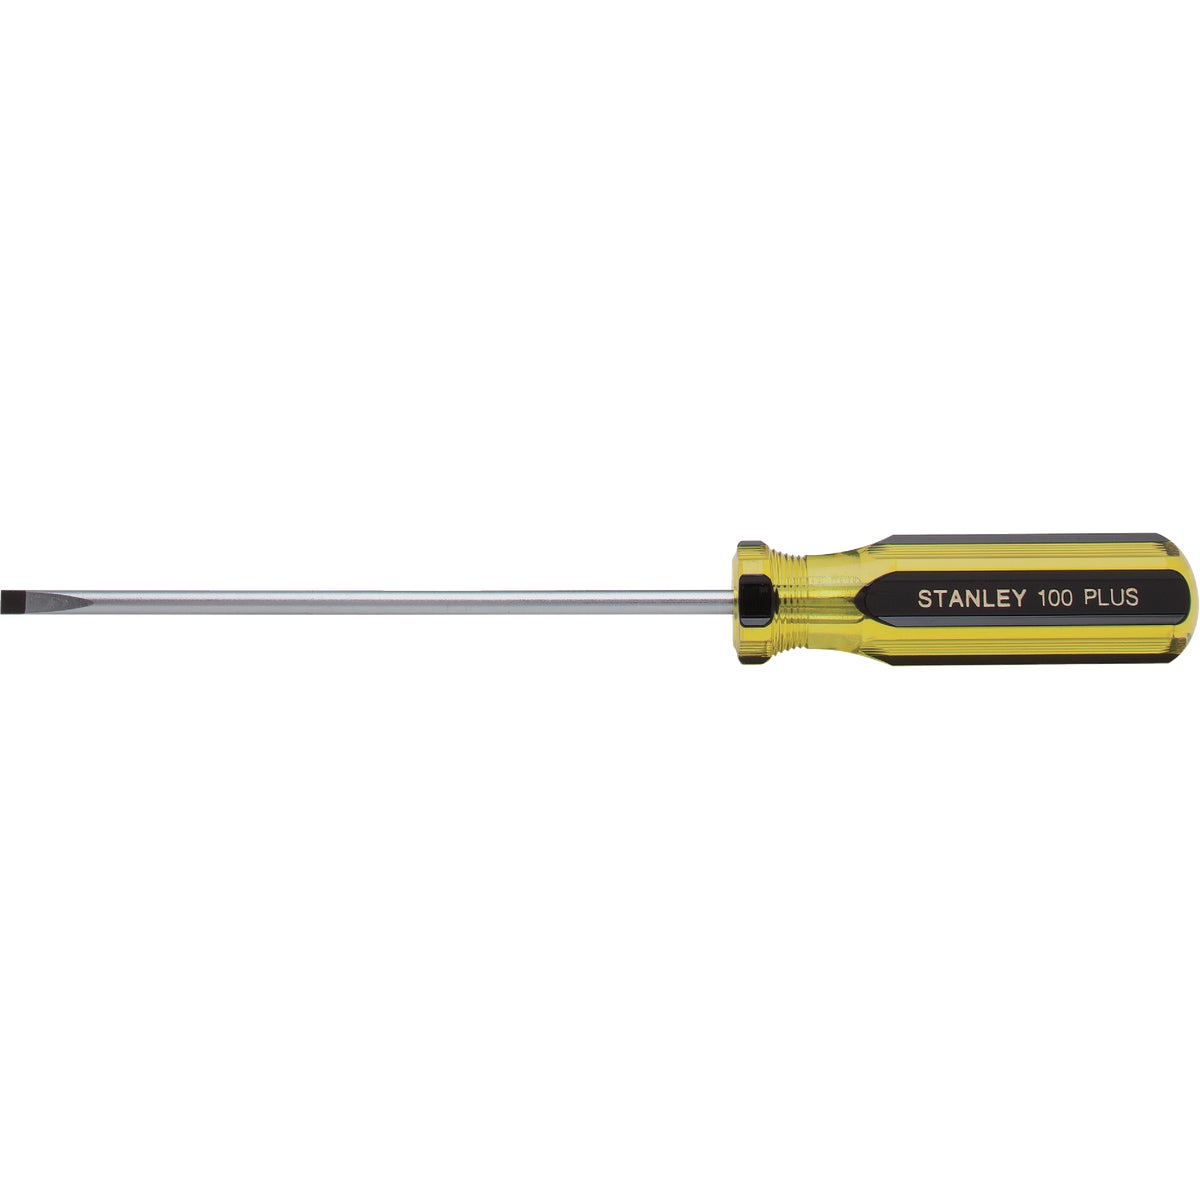 Stanley 100 PLUS 3/16 In. x 6 In. Cabinet Tip Slotted Screwdriver